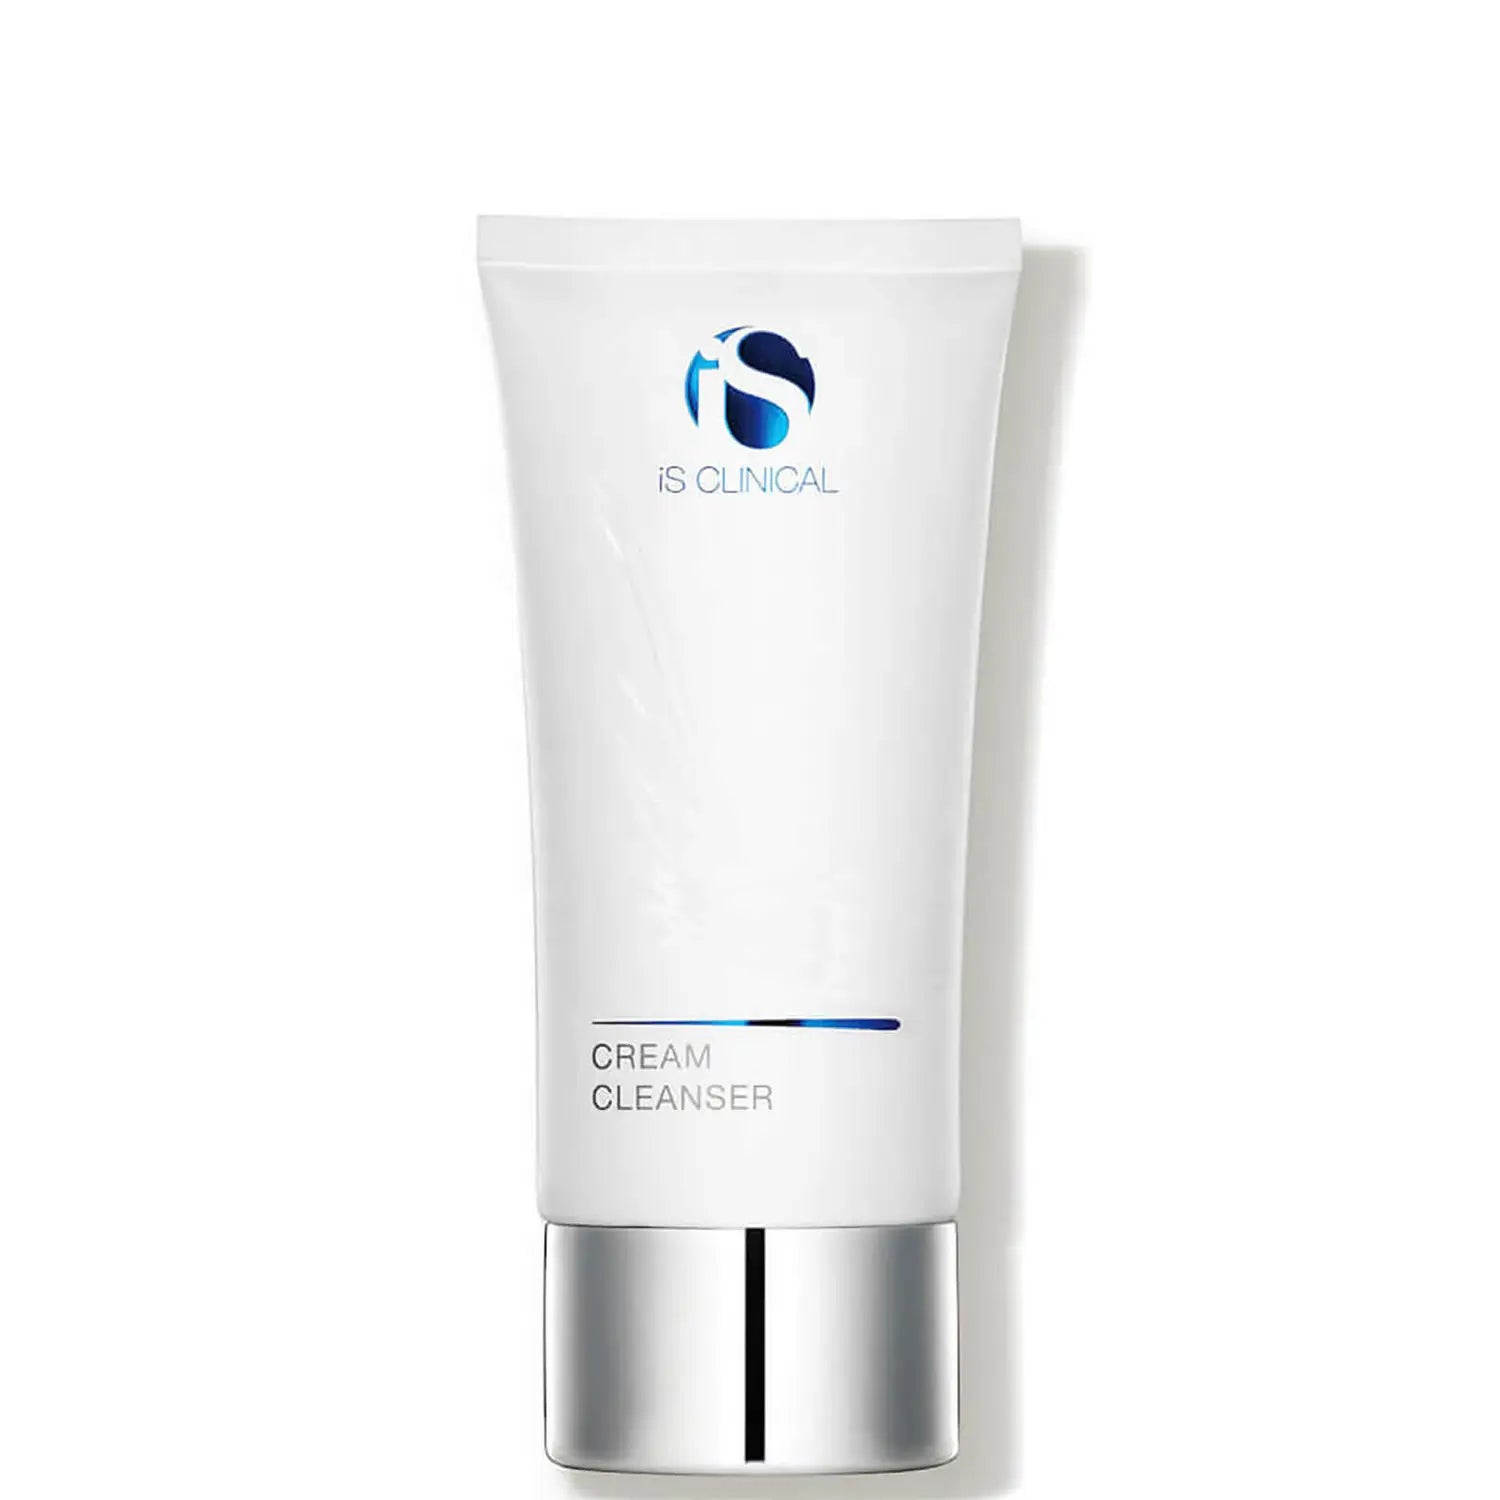 iSClinical Cream Cleanser